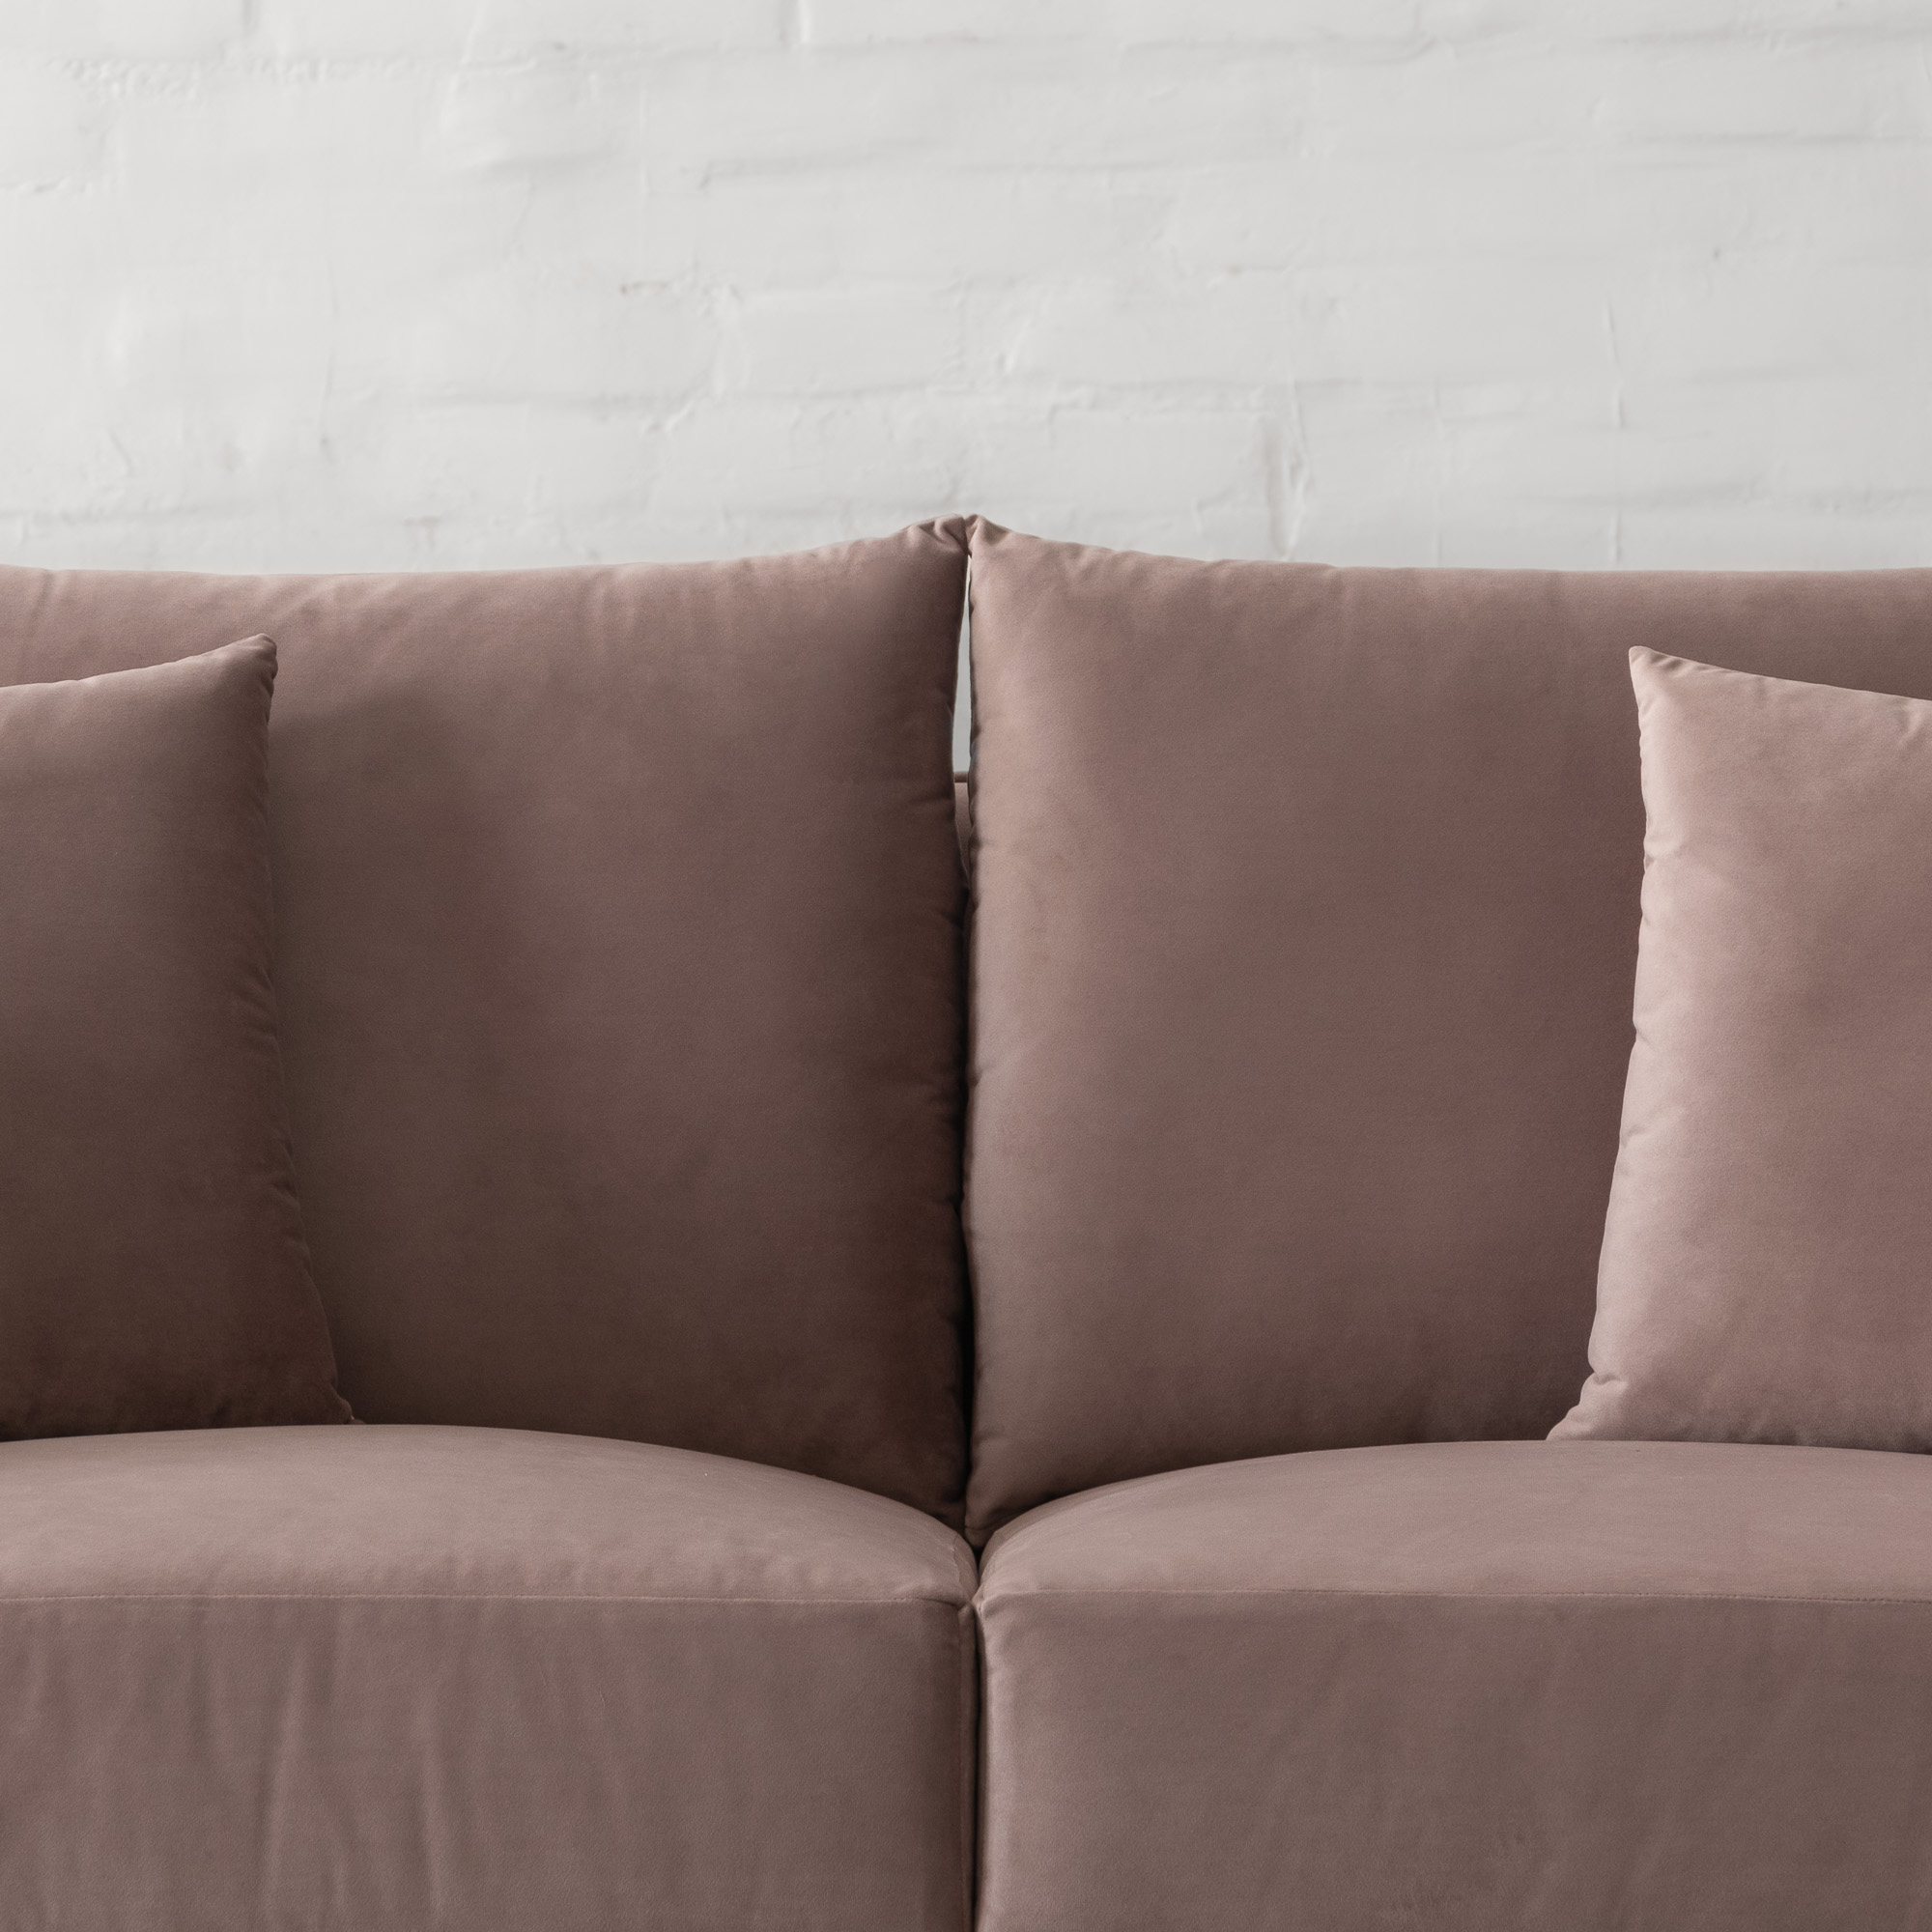 Norway Sofa Collection